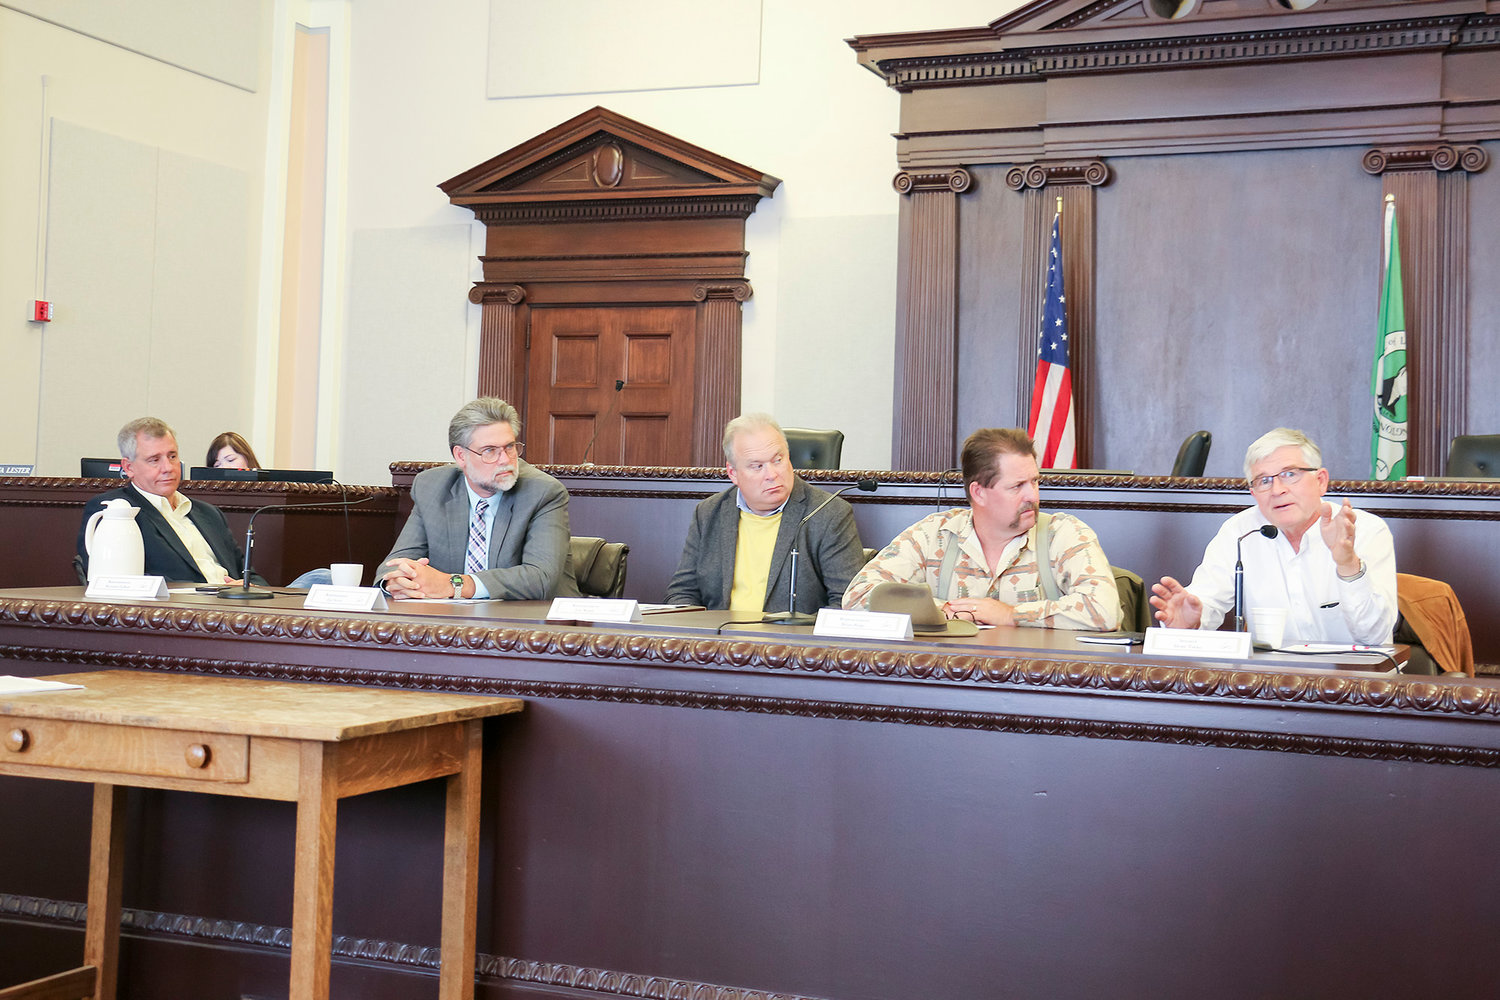 Representatives Richard DeBolt, Ed Orcutt, Jim Walsh, Brian Blake and Sen. Dean Takko took part in a Legislative roundtable in October 2017 at the Lewis County Courthouse in Chehalis.